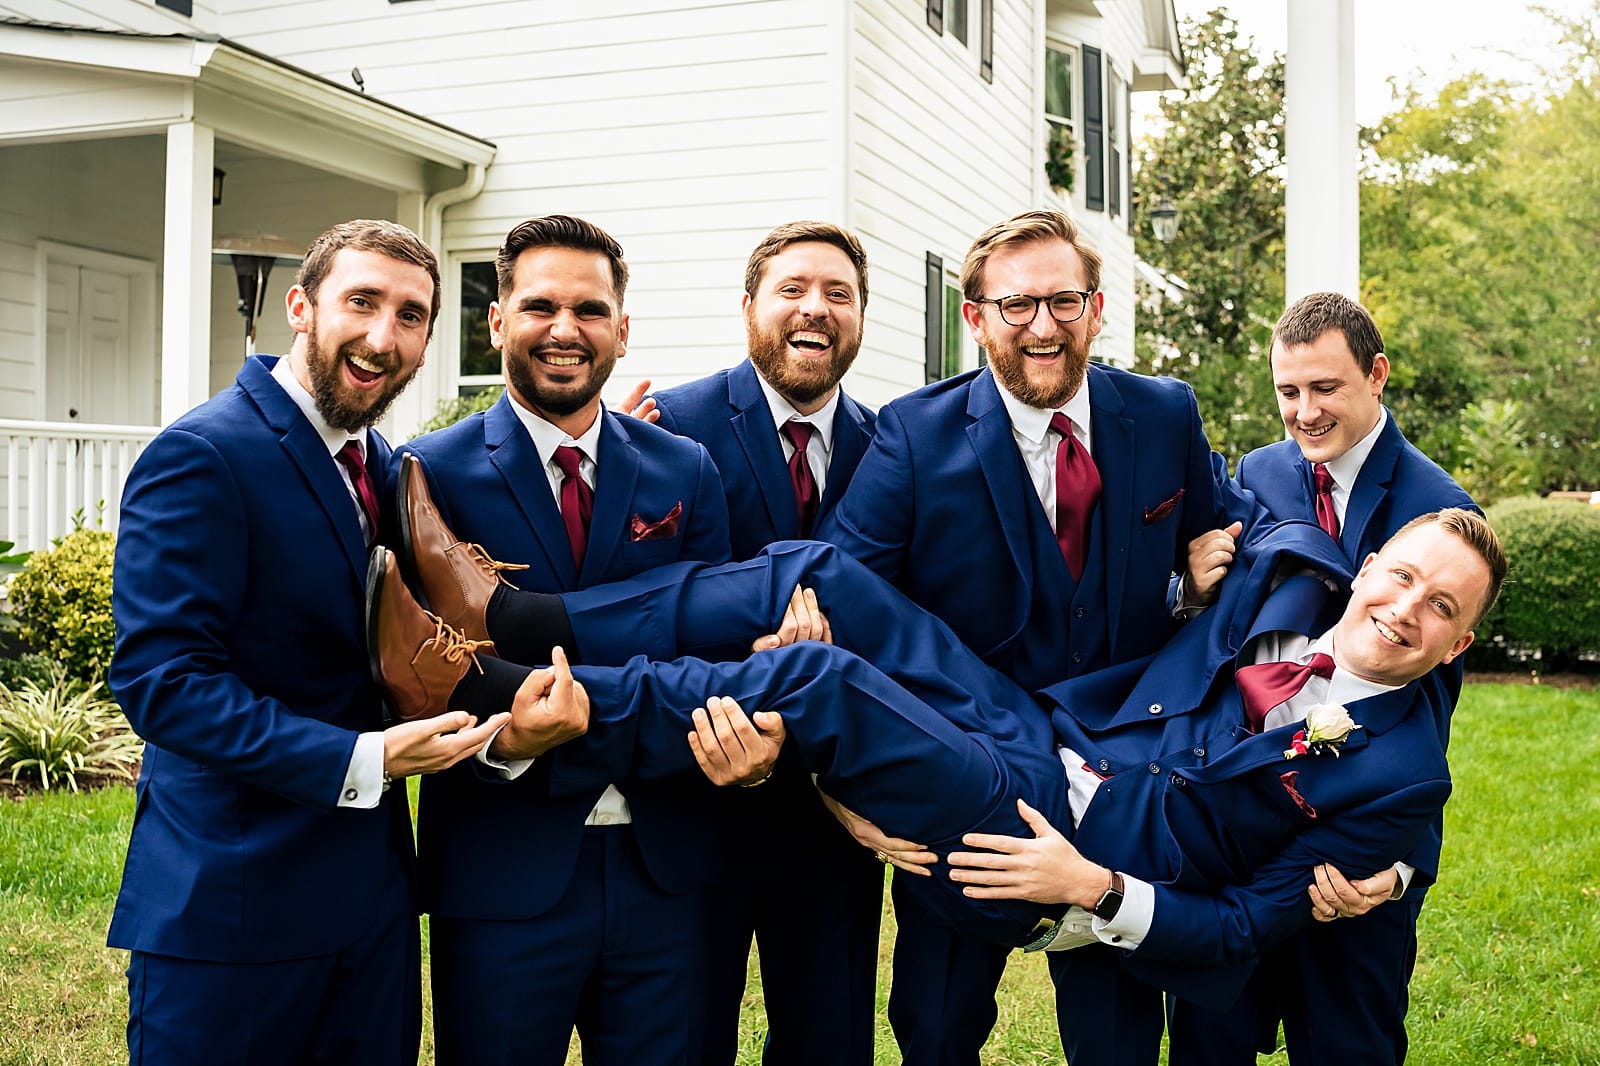 Groomsmen style inspiration - blue tuxedos with red ties